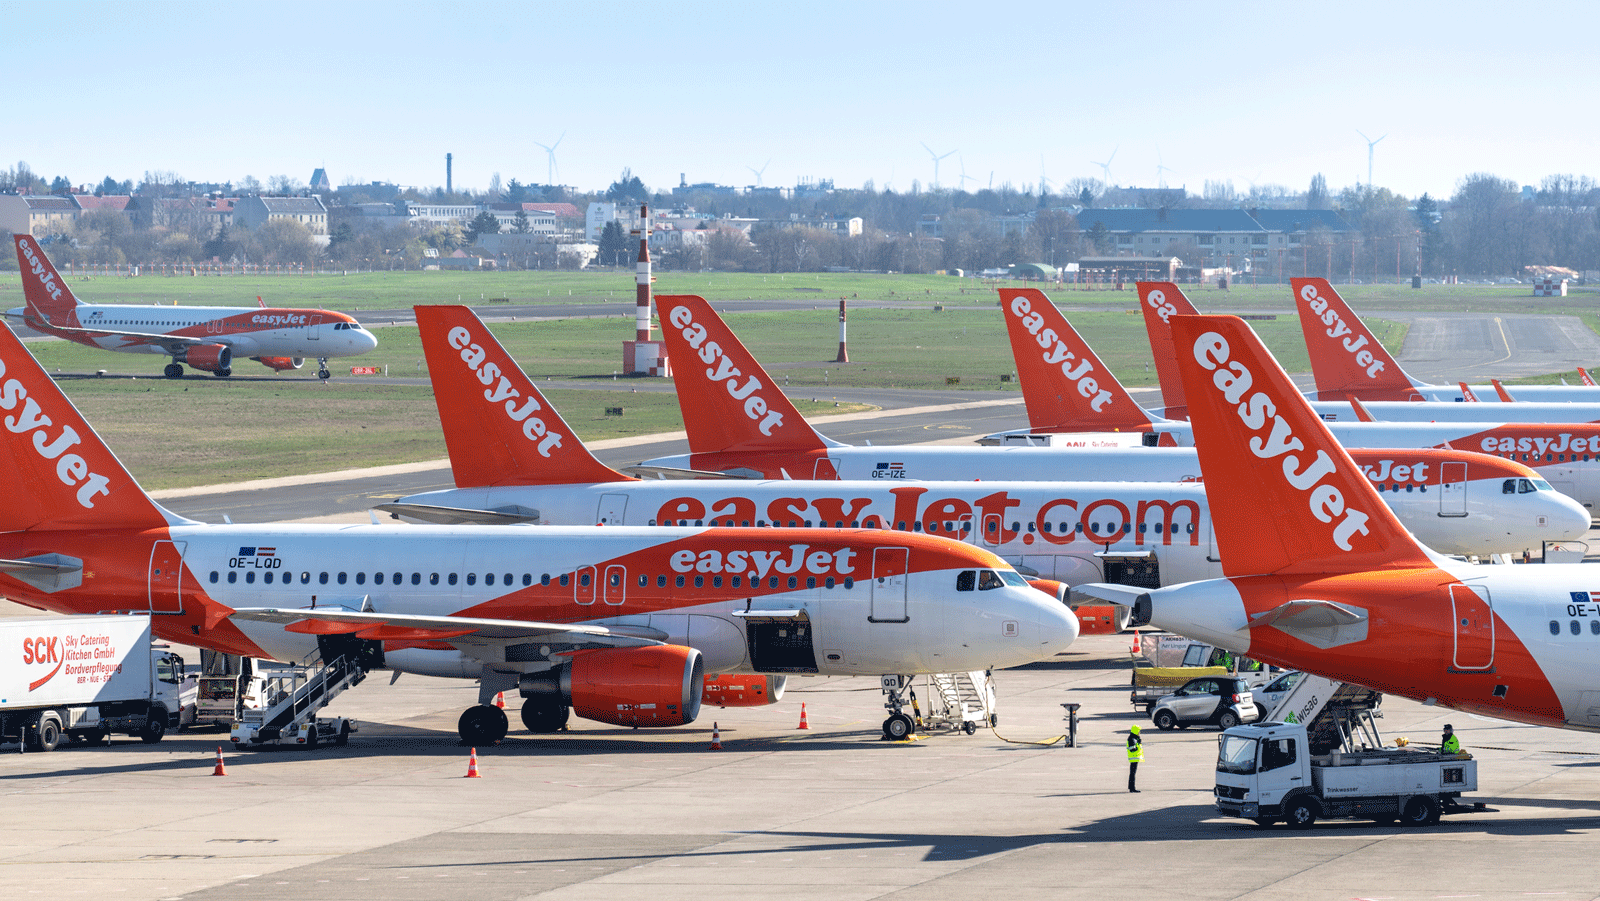 easyJet opens new AI-equipped control centre in Luton to better manage flights